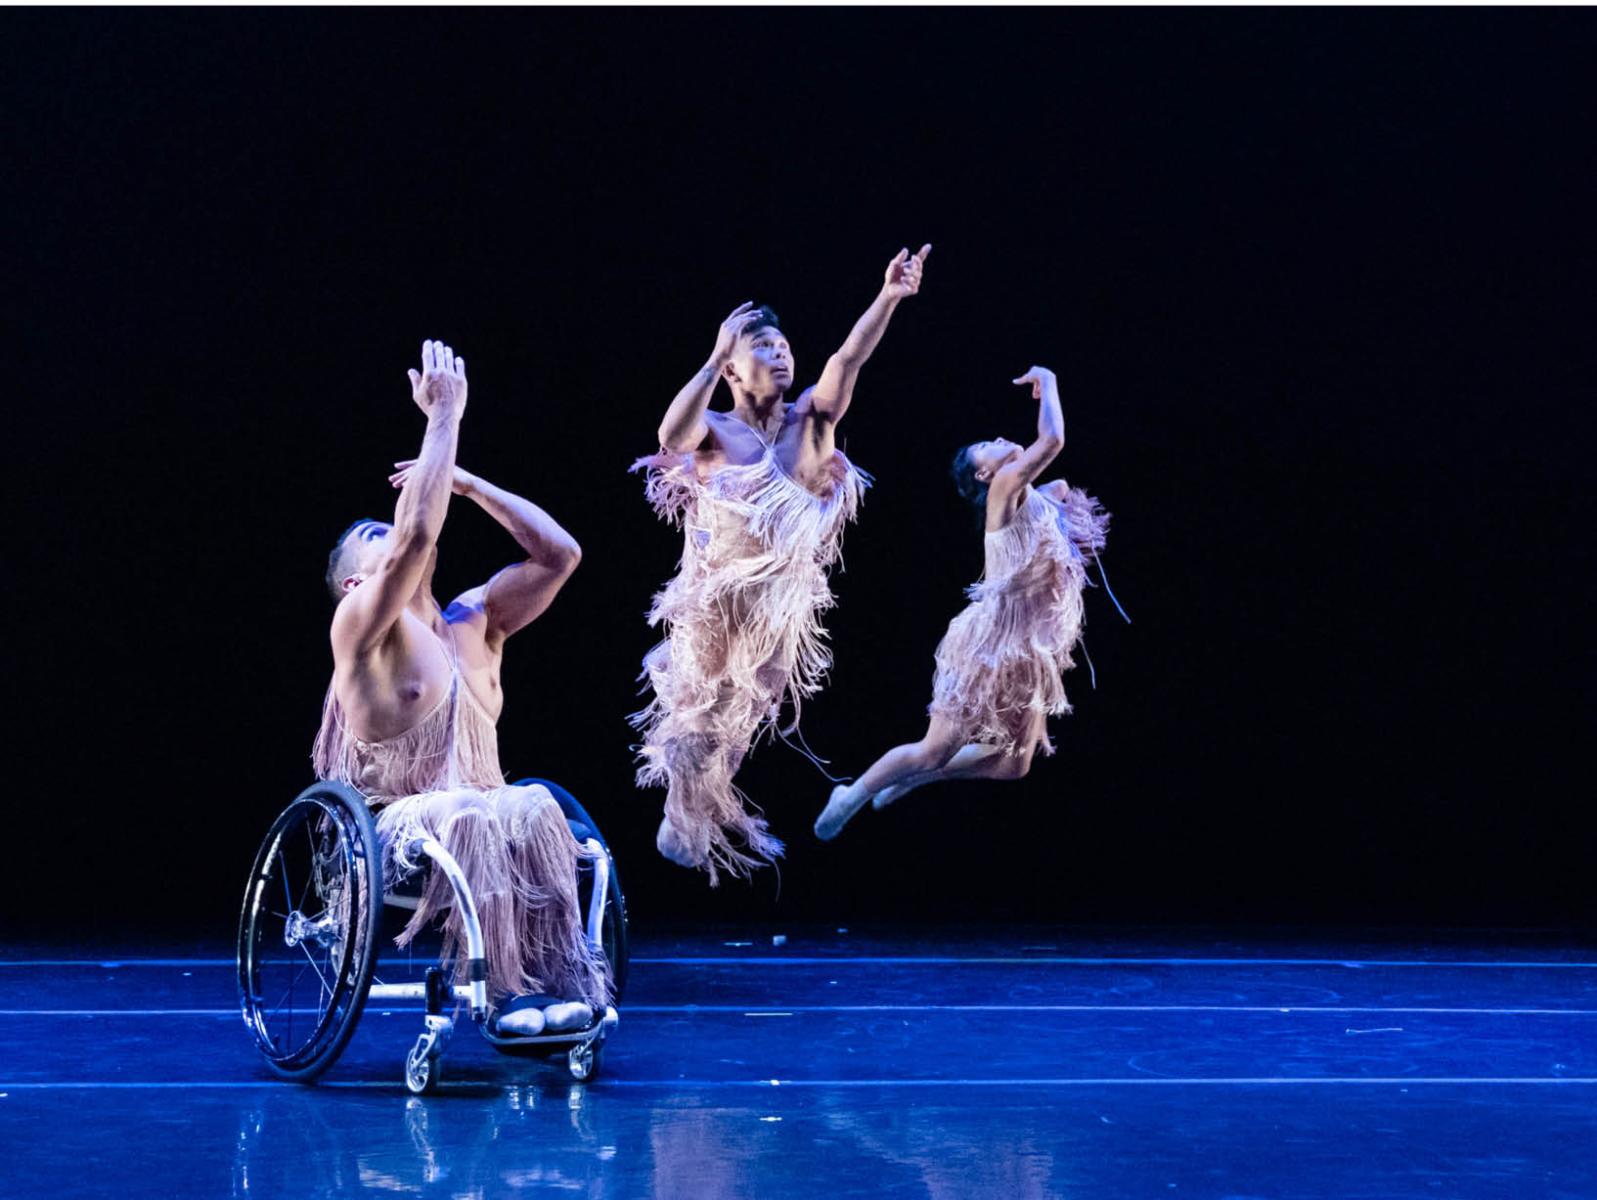 Three dancers in feathery costumes on stage, one is seated in wheel chair, others leap